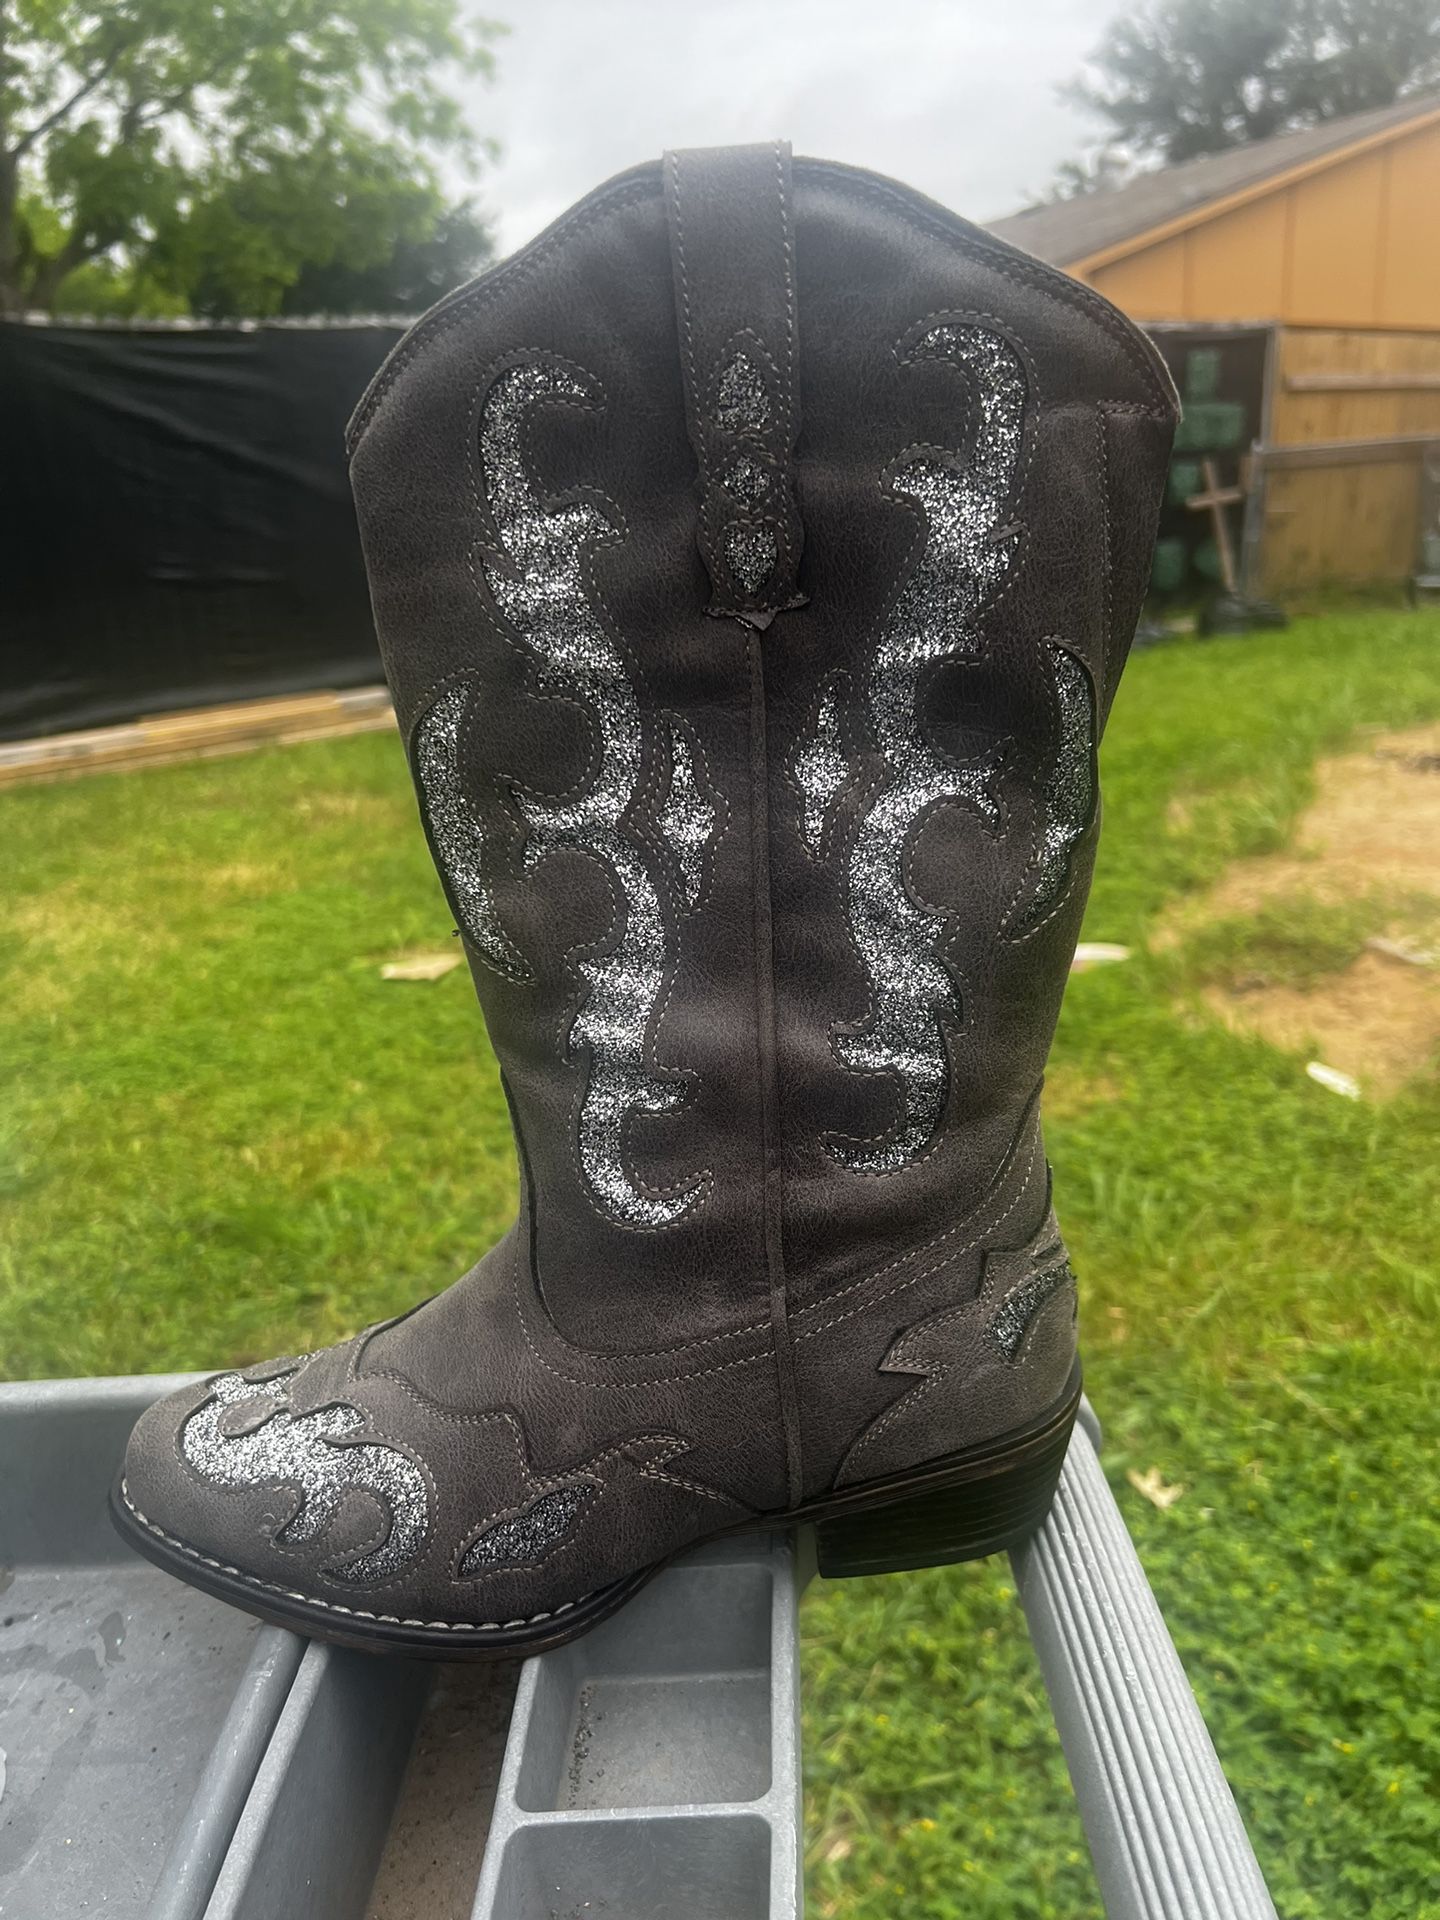 Women’s Cowgirl Boots 